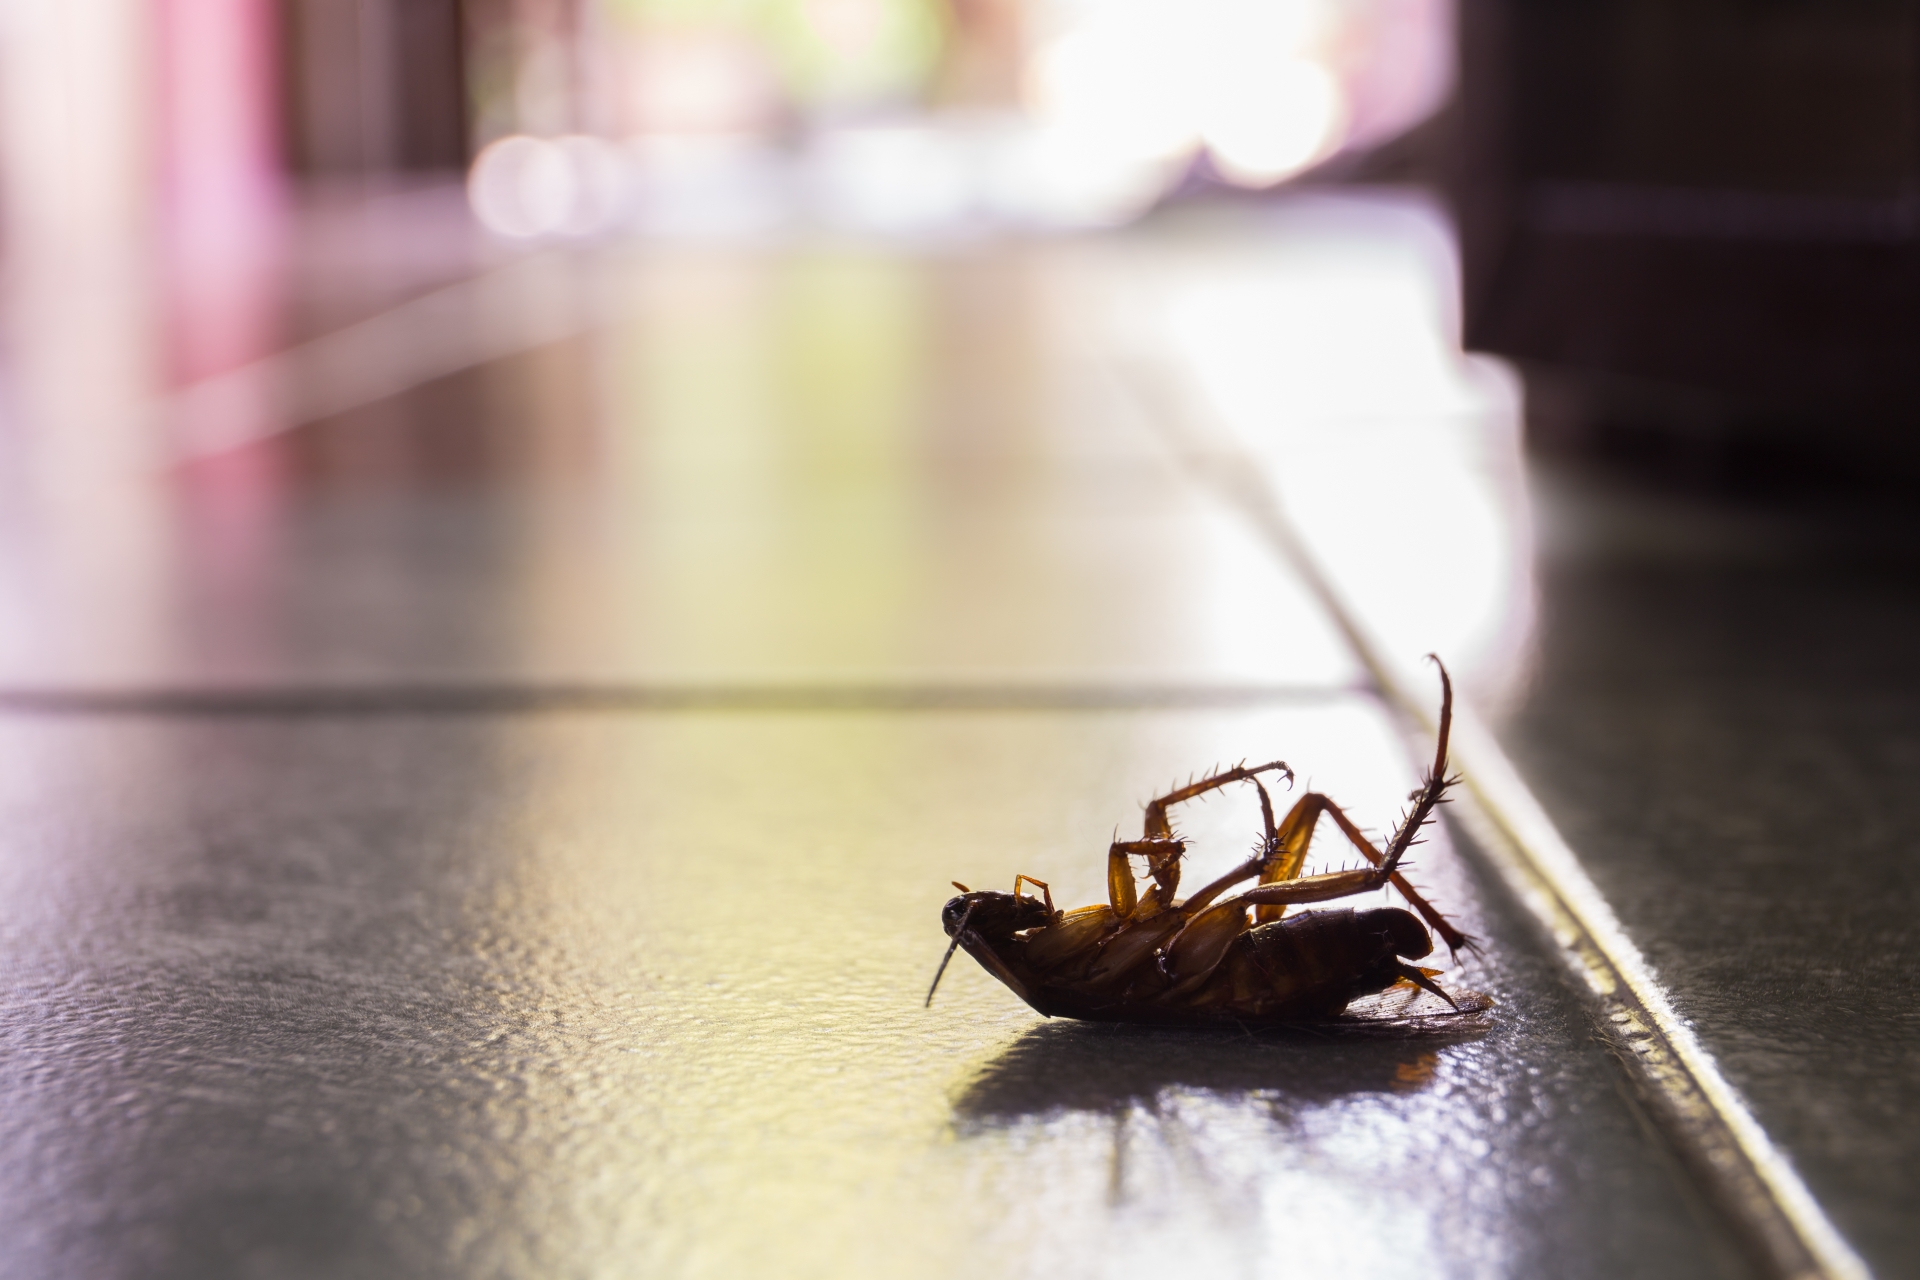 Cockroach Control, Pest Control in West Kensington, W14. Call Now 020 8166 9746